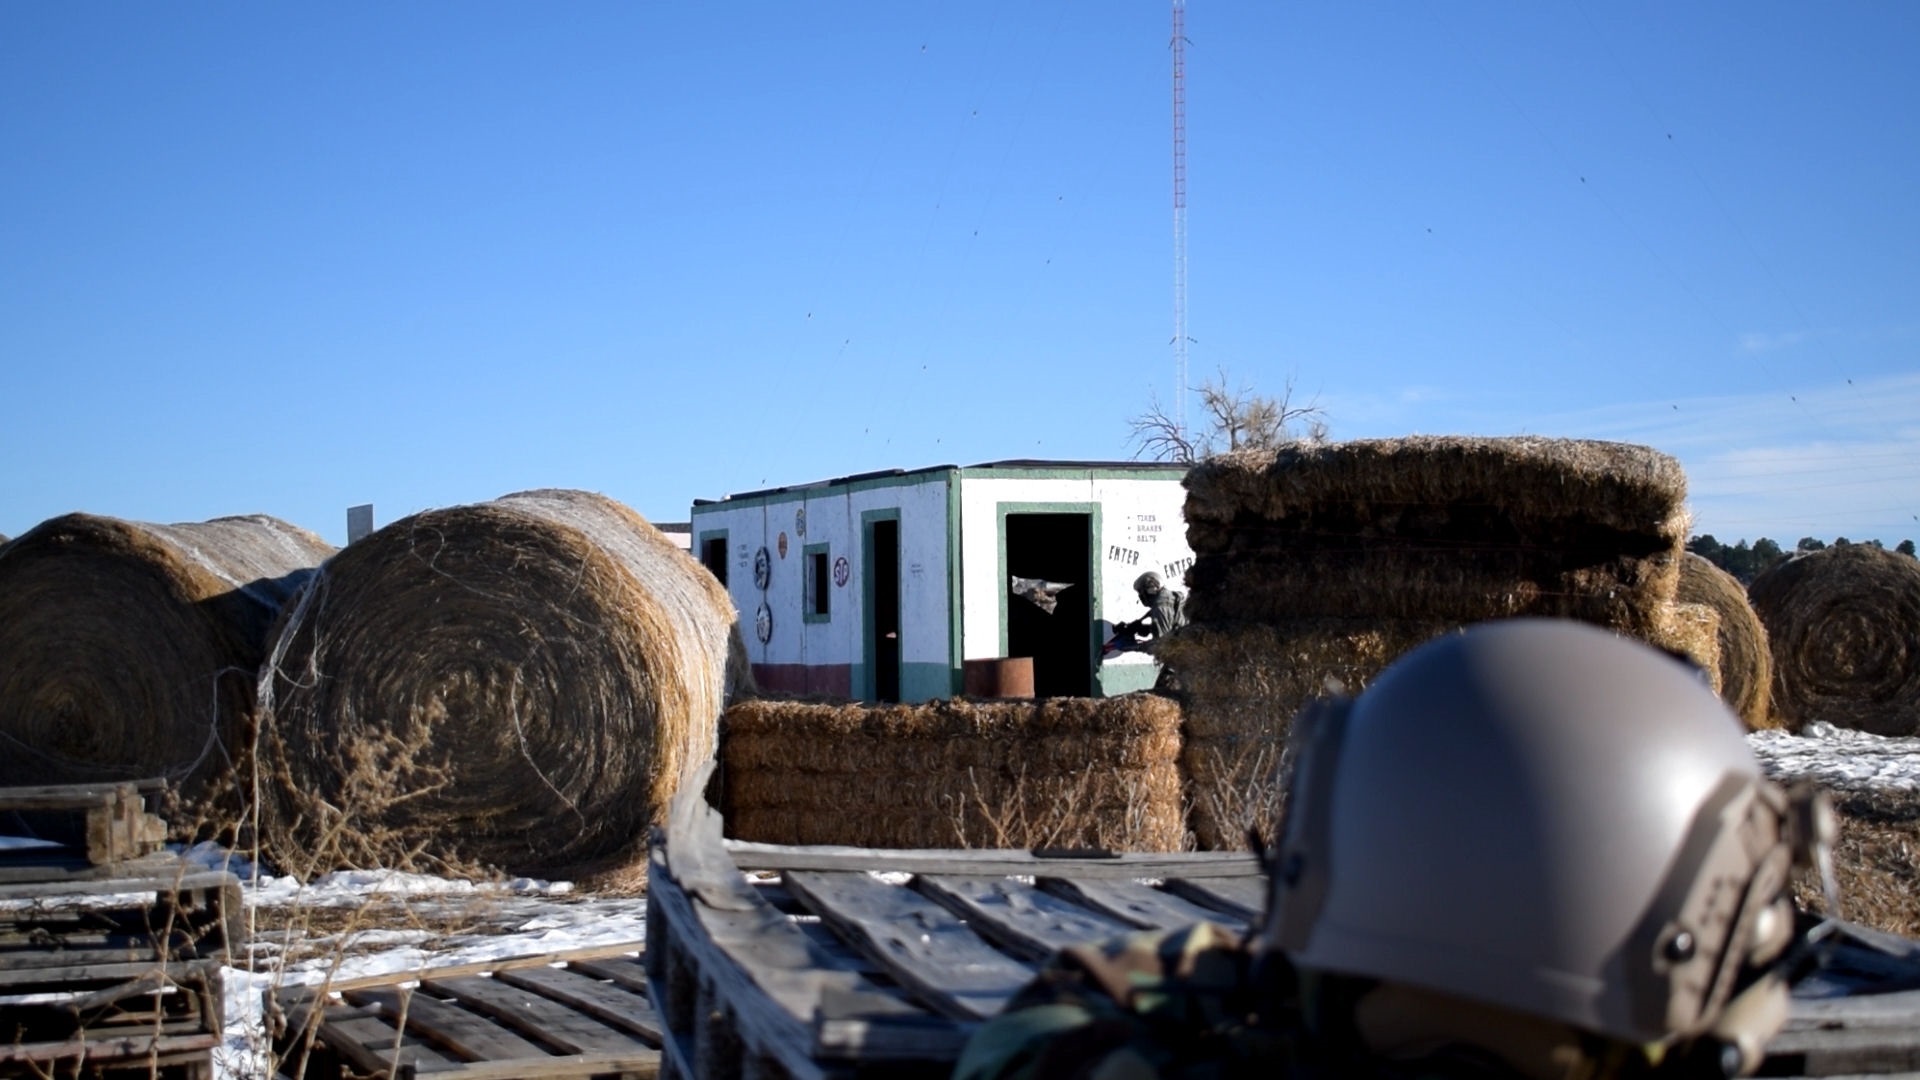 Airsoft player in foreground with helmet looking towards a mock building with target symbols, hay bales and clear blue sky in the background.